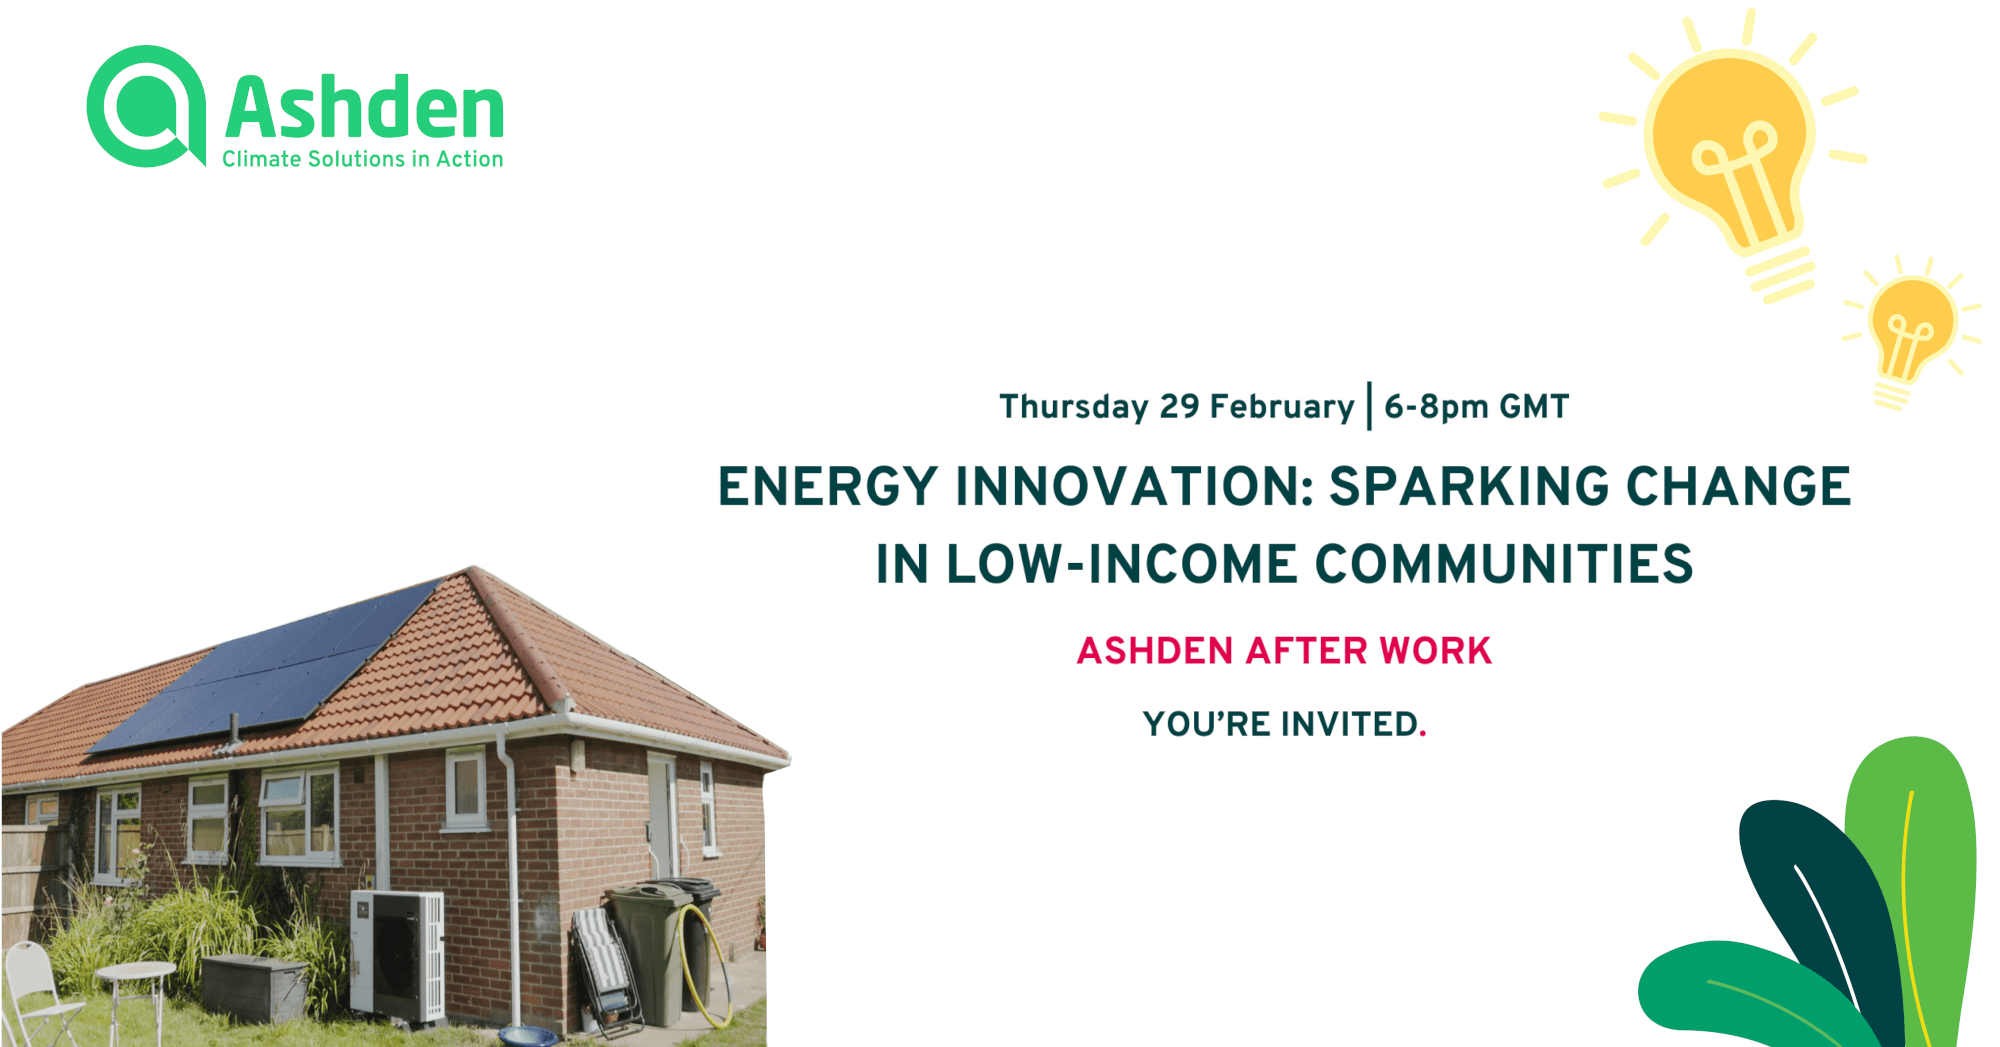 Energy innovation: Sparking change in low-income communities